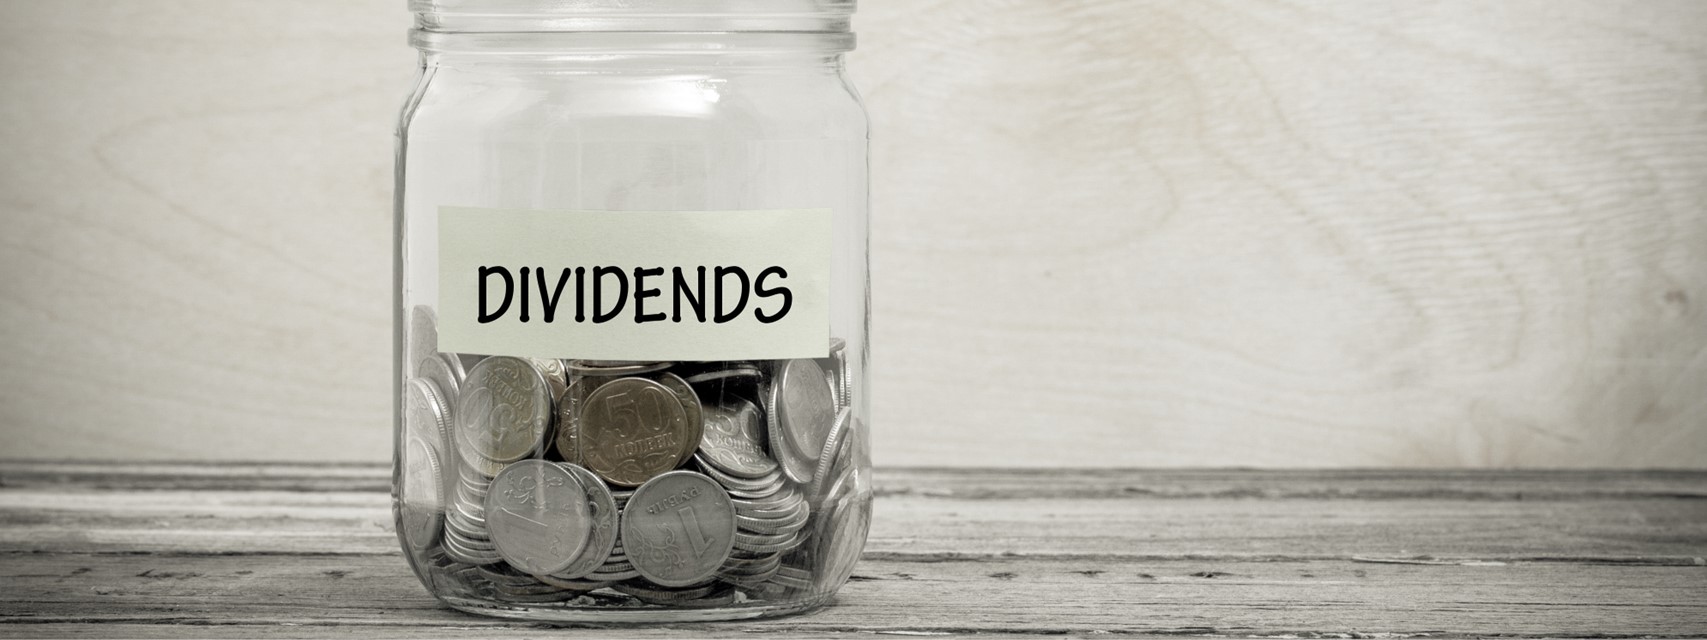 Glass jar filled with coins and labelled "Dividends"